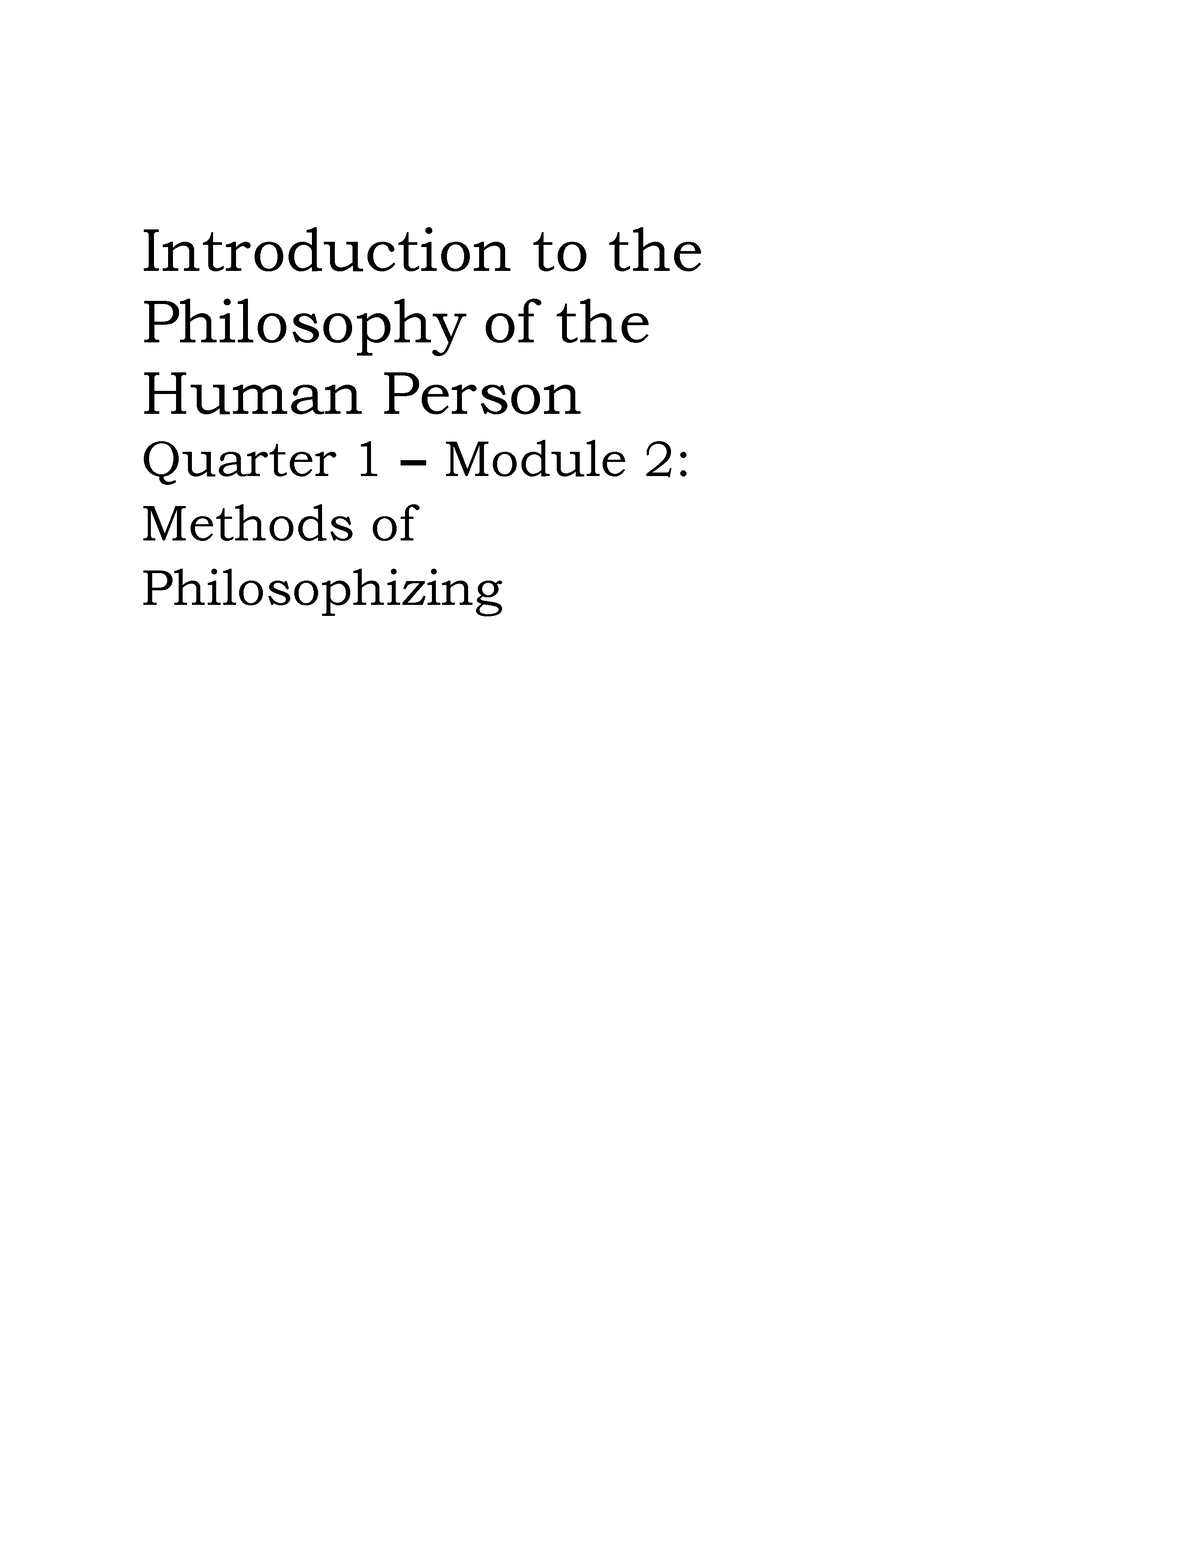 Philo Q1 Module 1 Introduction To The Philosophy Of The Human Person Quarter 1 Module 2 9914